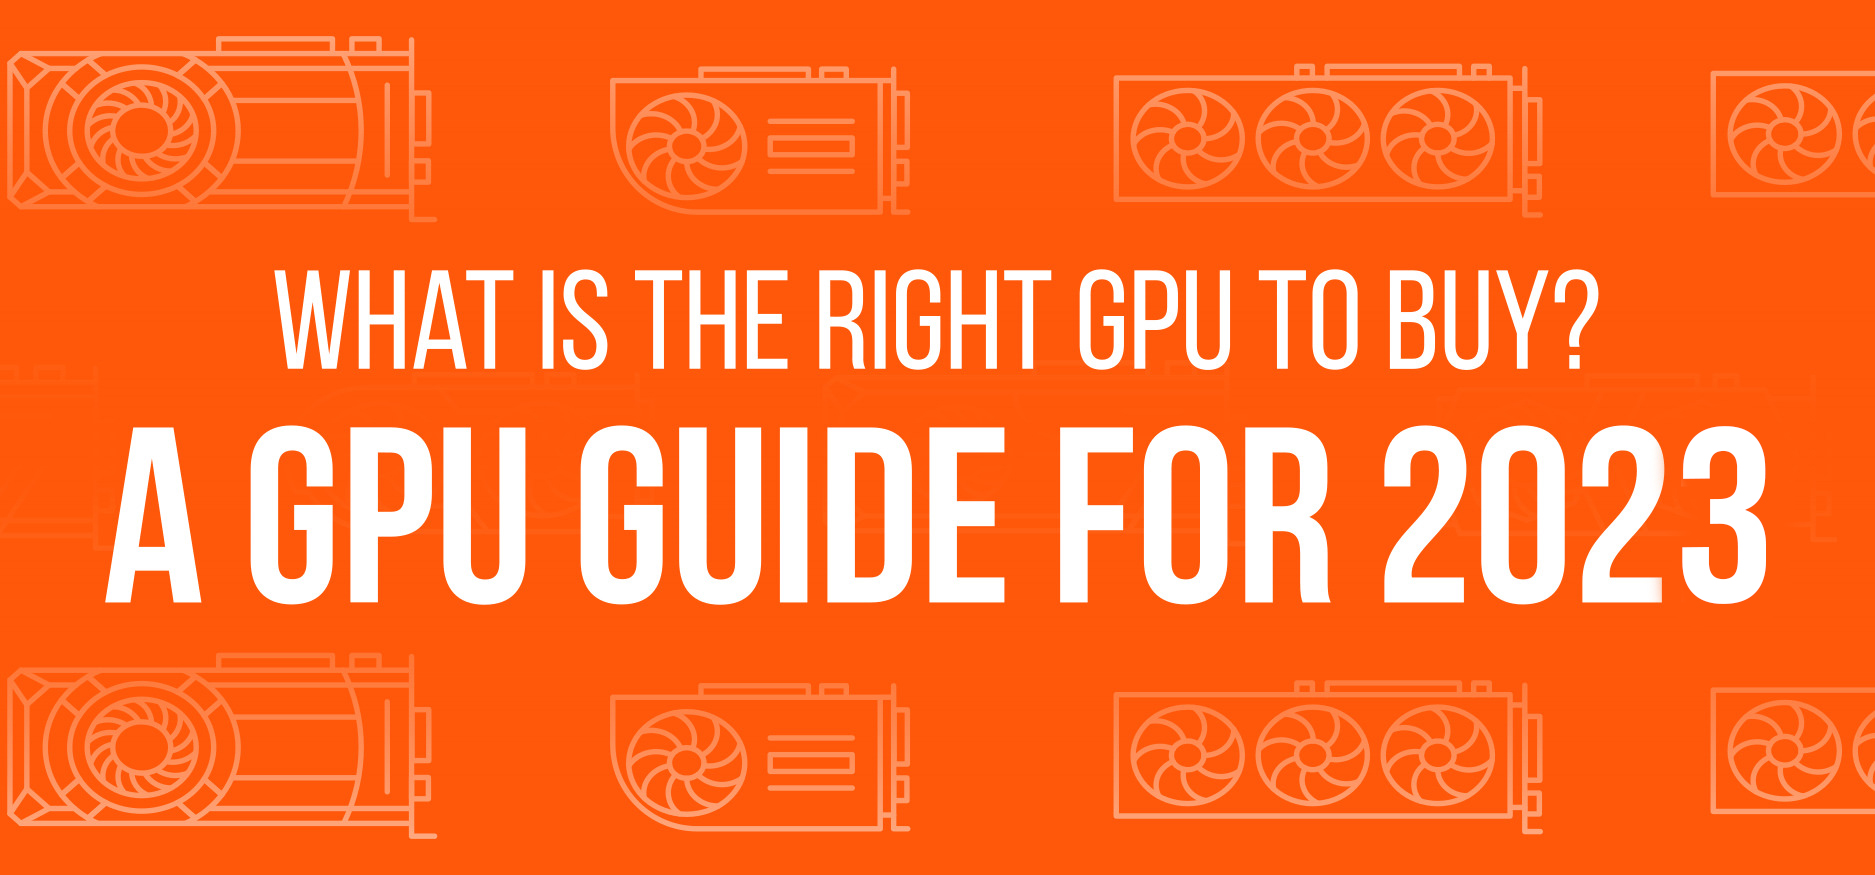 What is the Right GPU to Buy? A GPU Guide for 2023